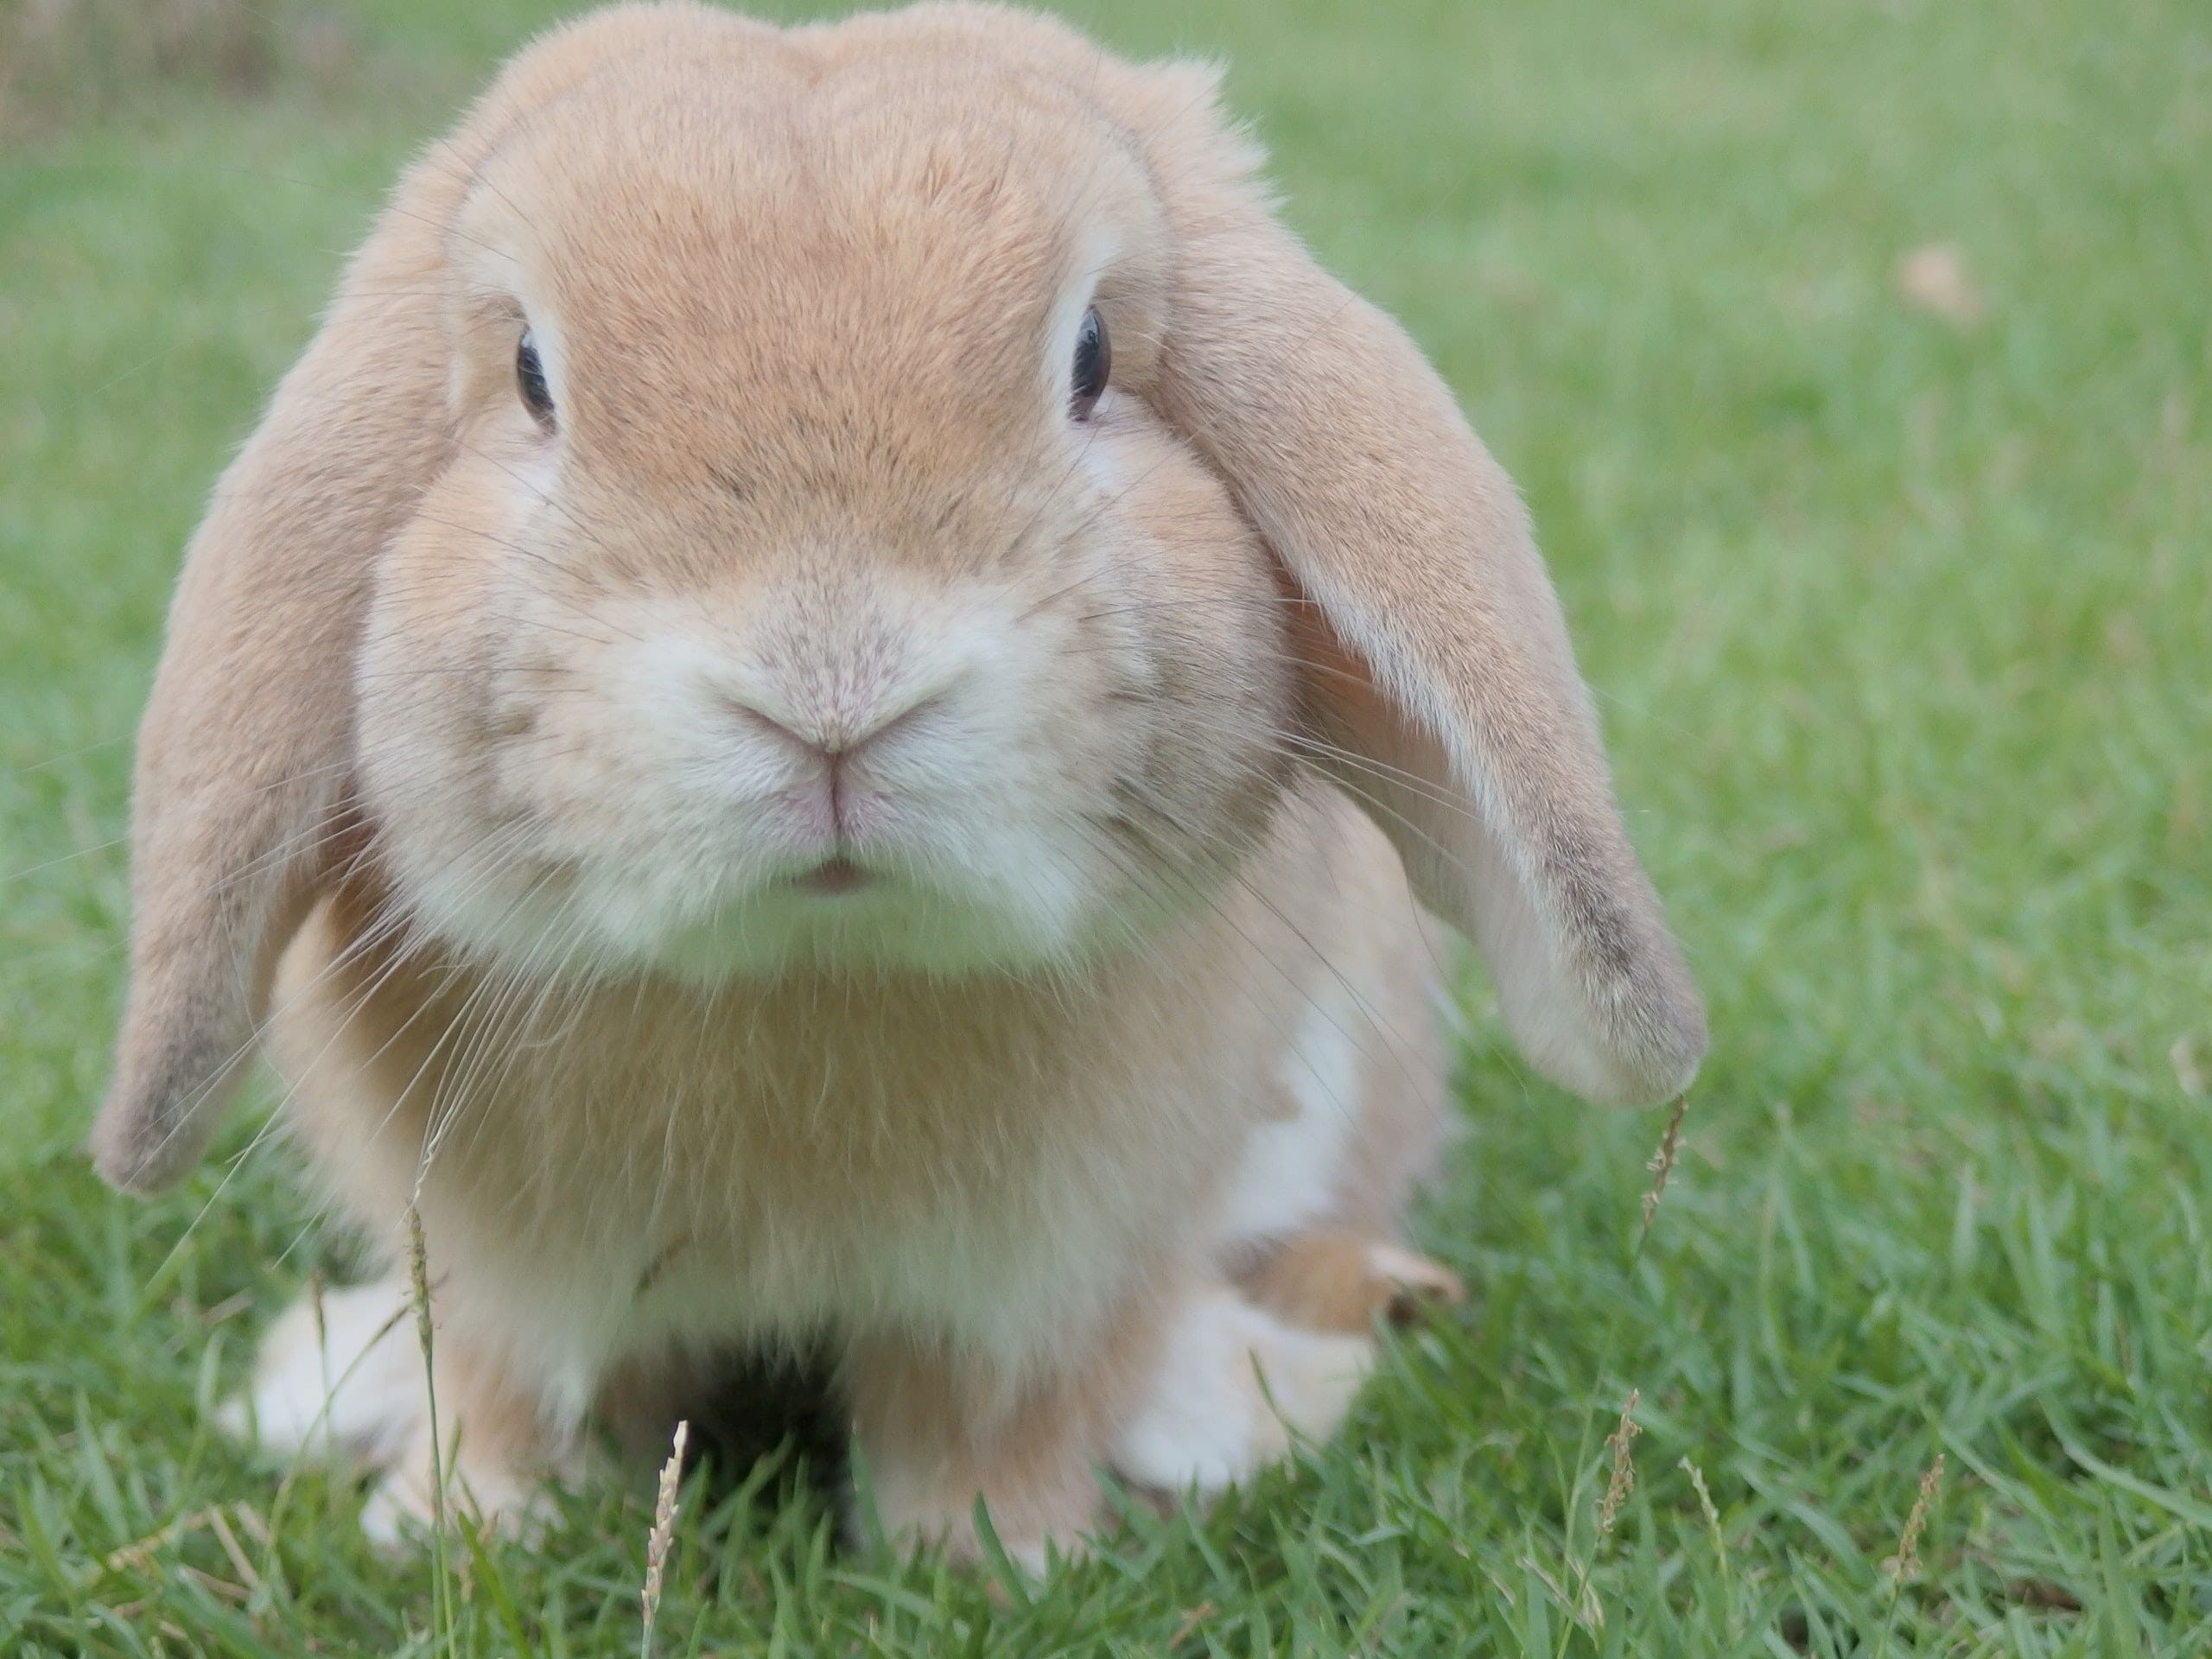 Step Aside Dogecoin, People Are Now On The Hunt For A 'Bunny Crypto'